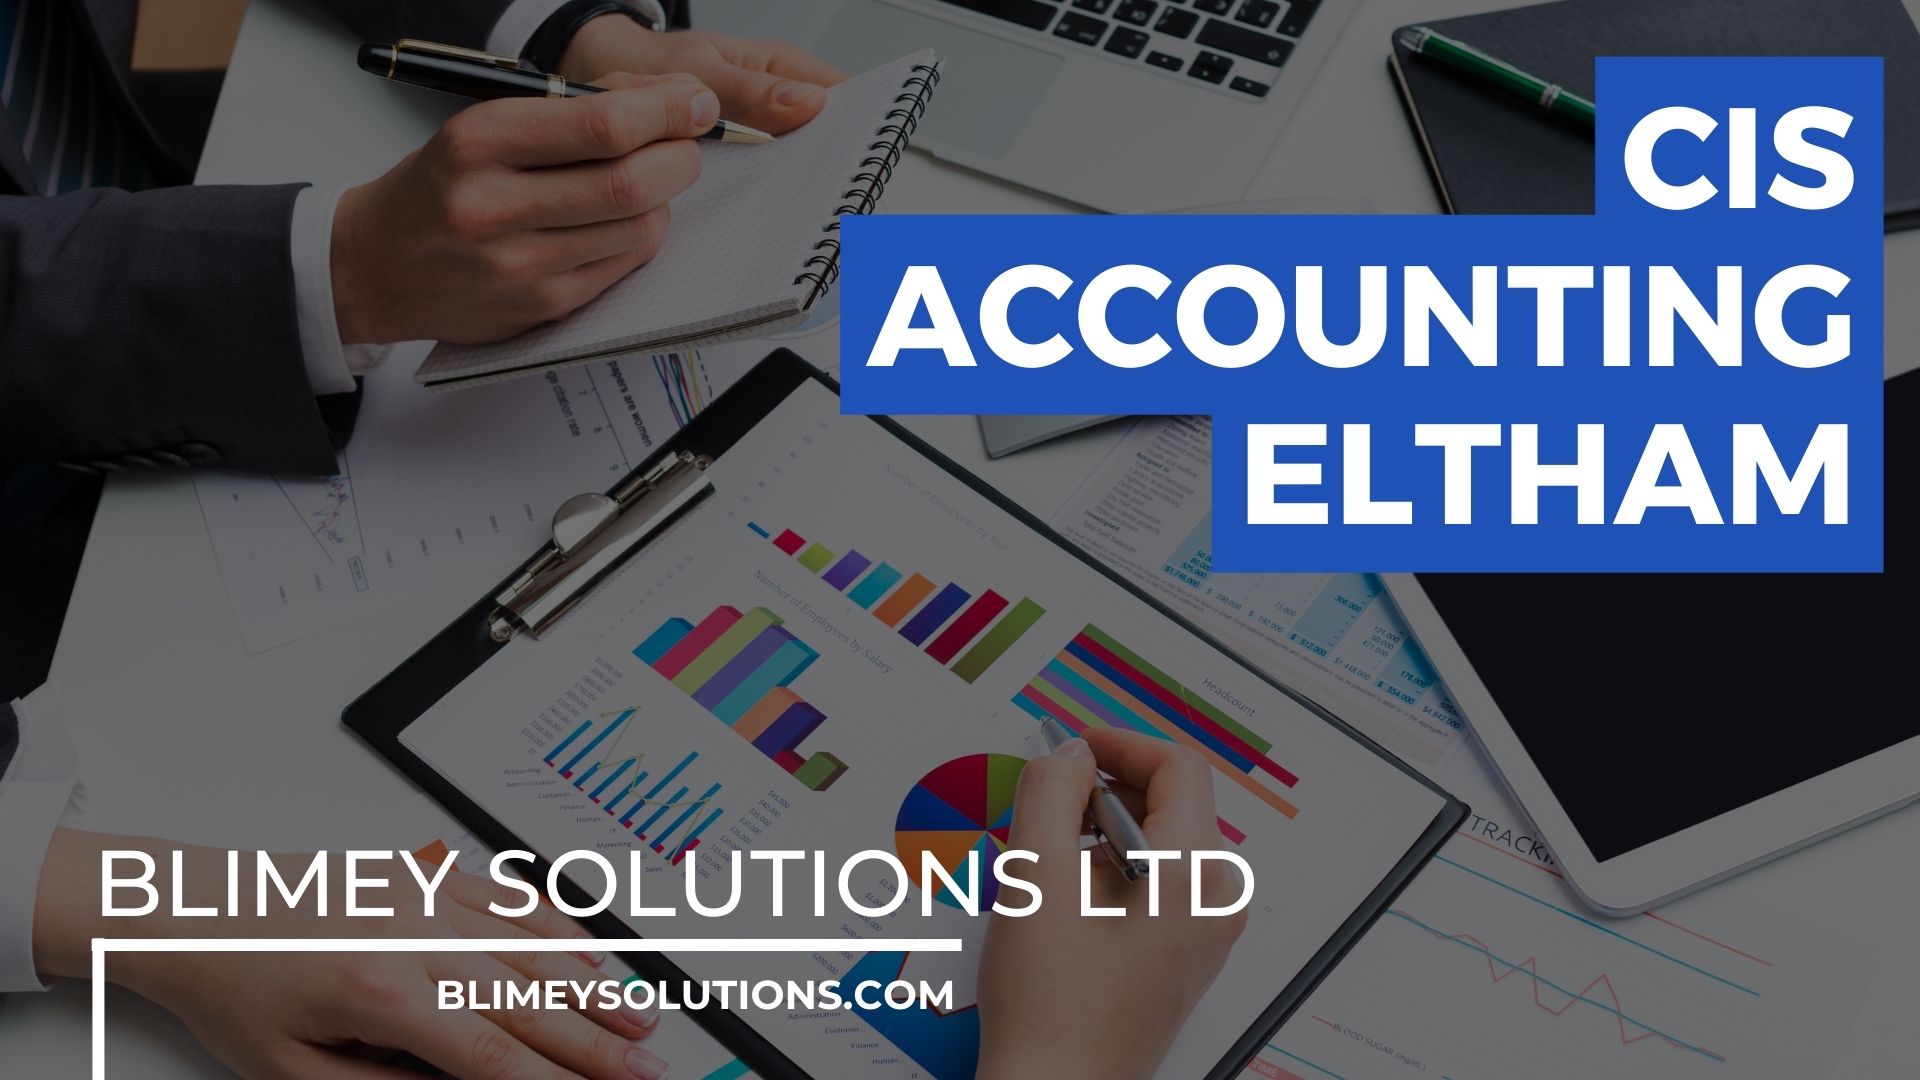 CIS Accounting in Eltham SE9 London